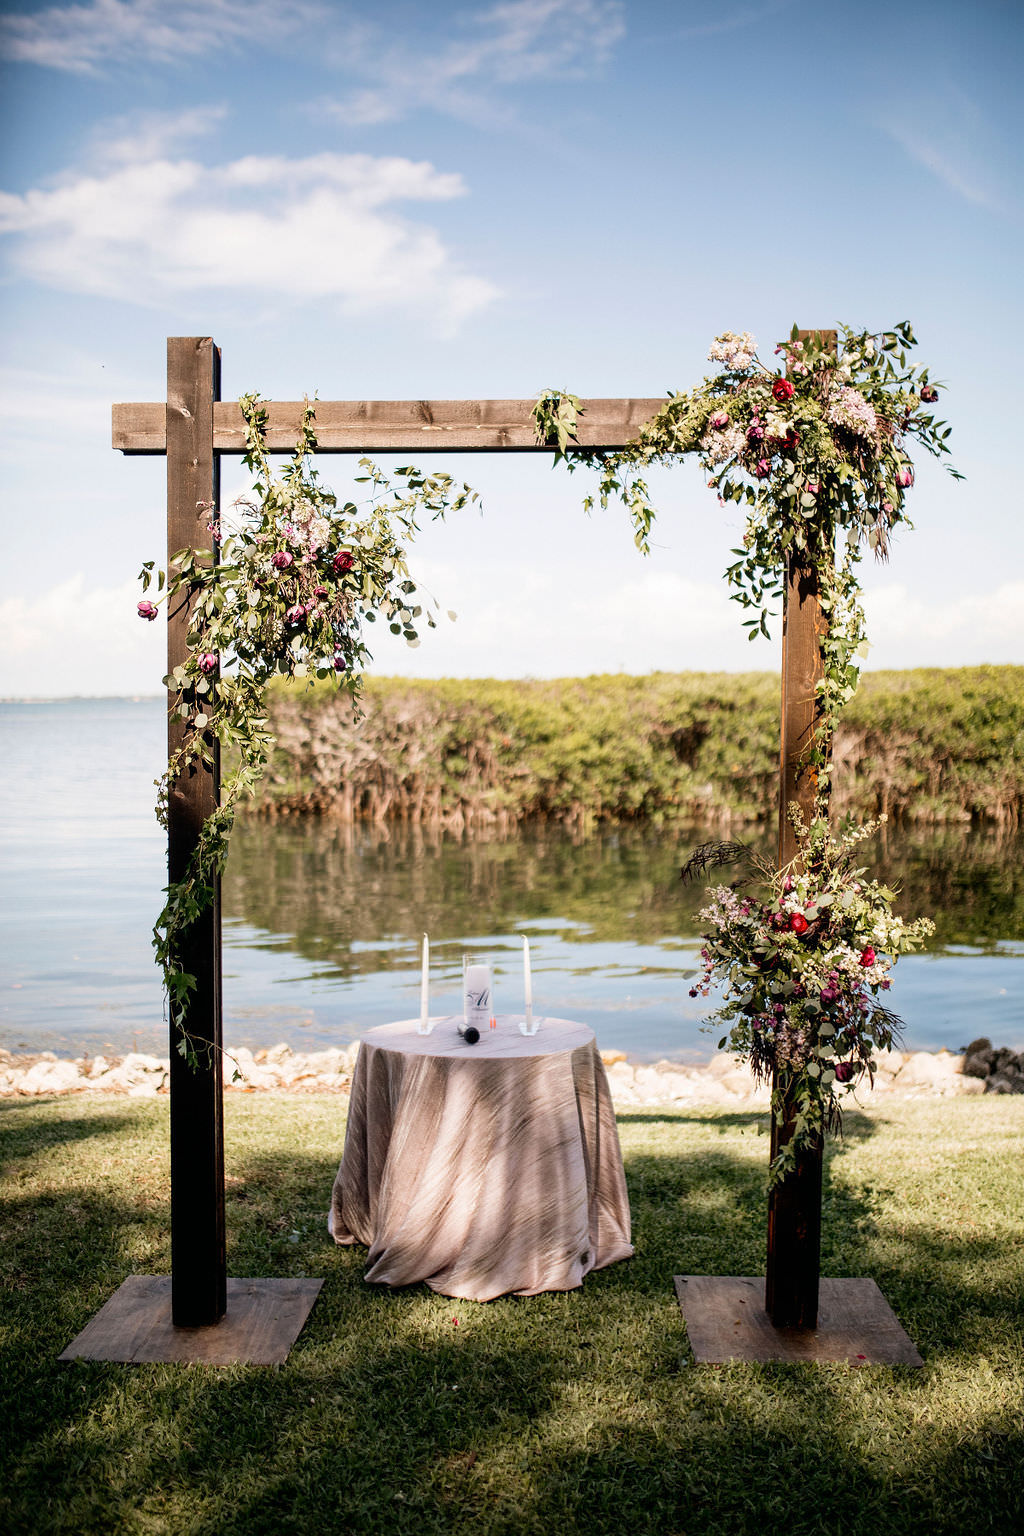 Romantic Waterfront Wedding Ceremony Portrait with Wooden Arch with Purple, Blush Pink and Greenery Floral Arrangements Waterfront Portrait | Wedding Venue The Resort at Longboat Key Club